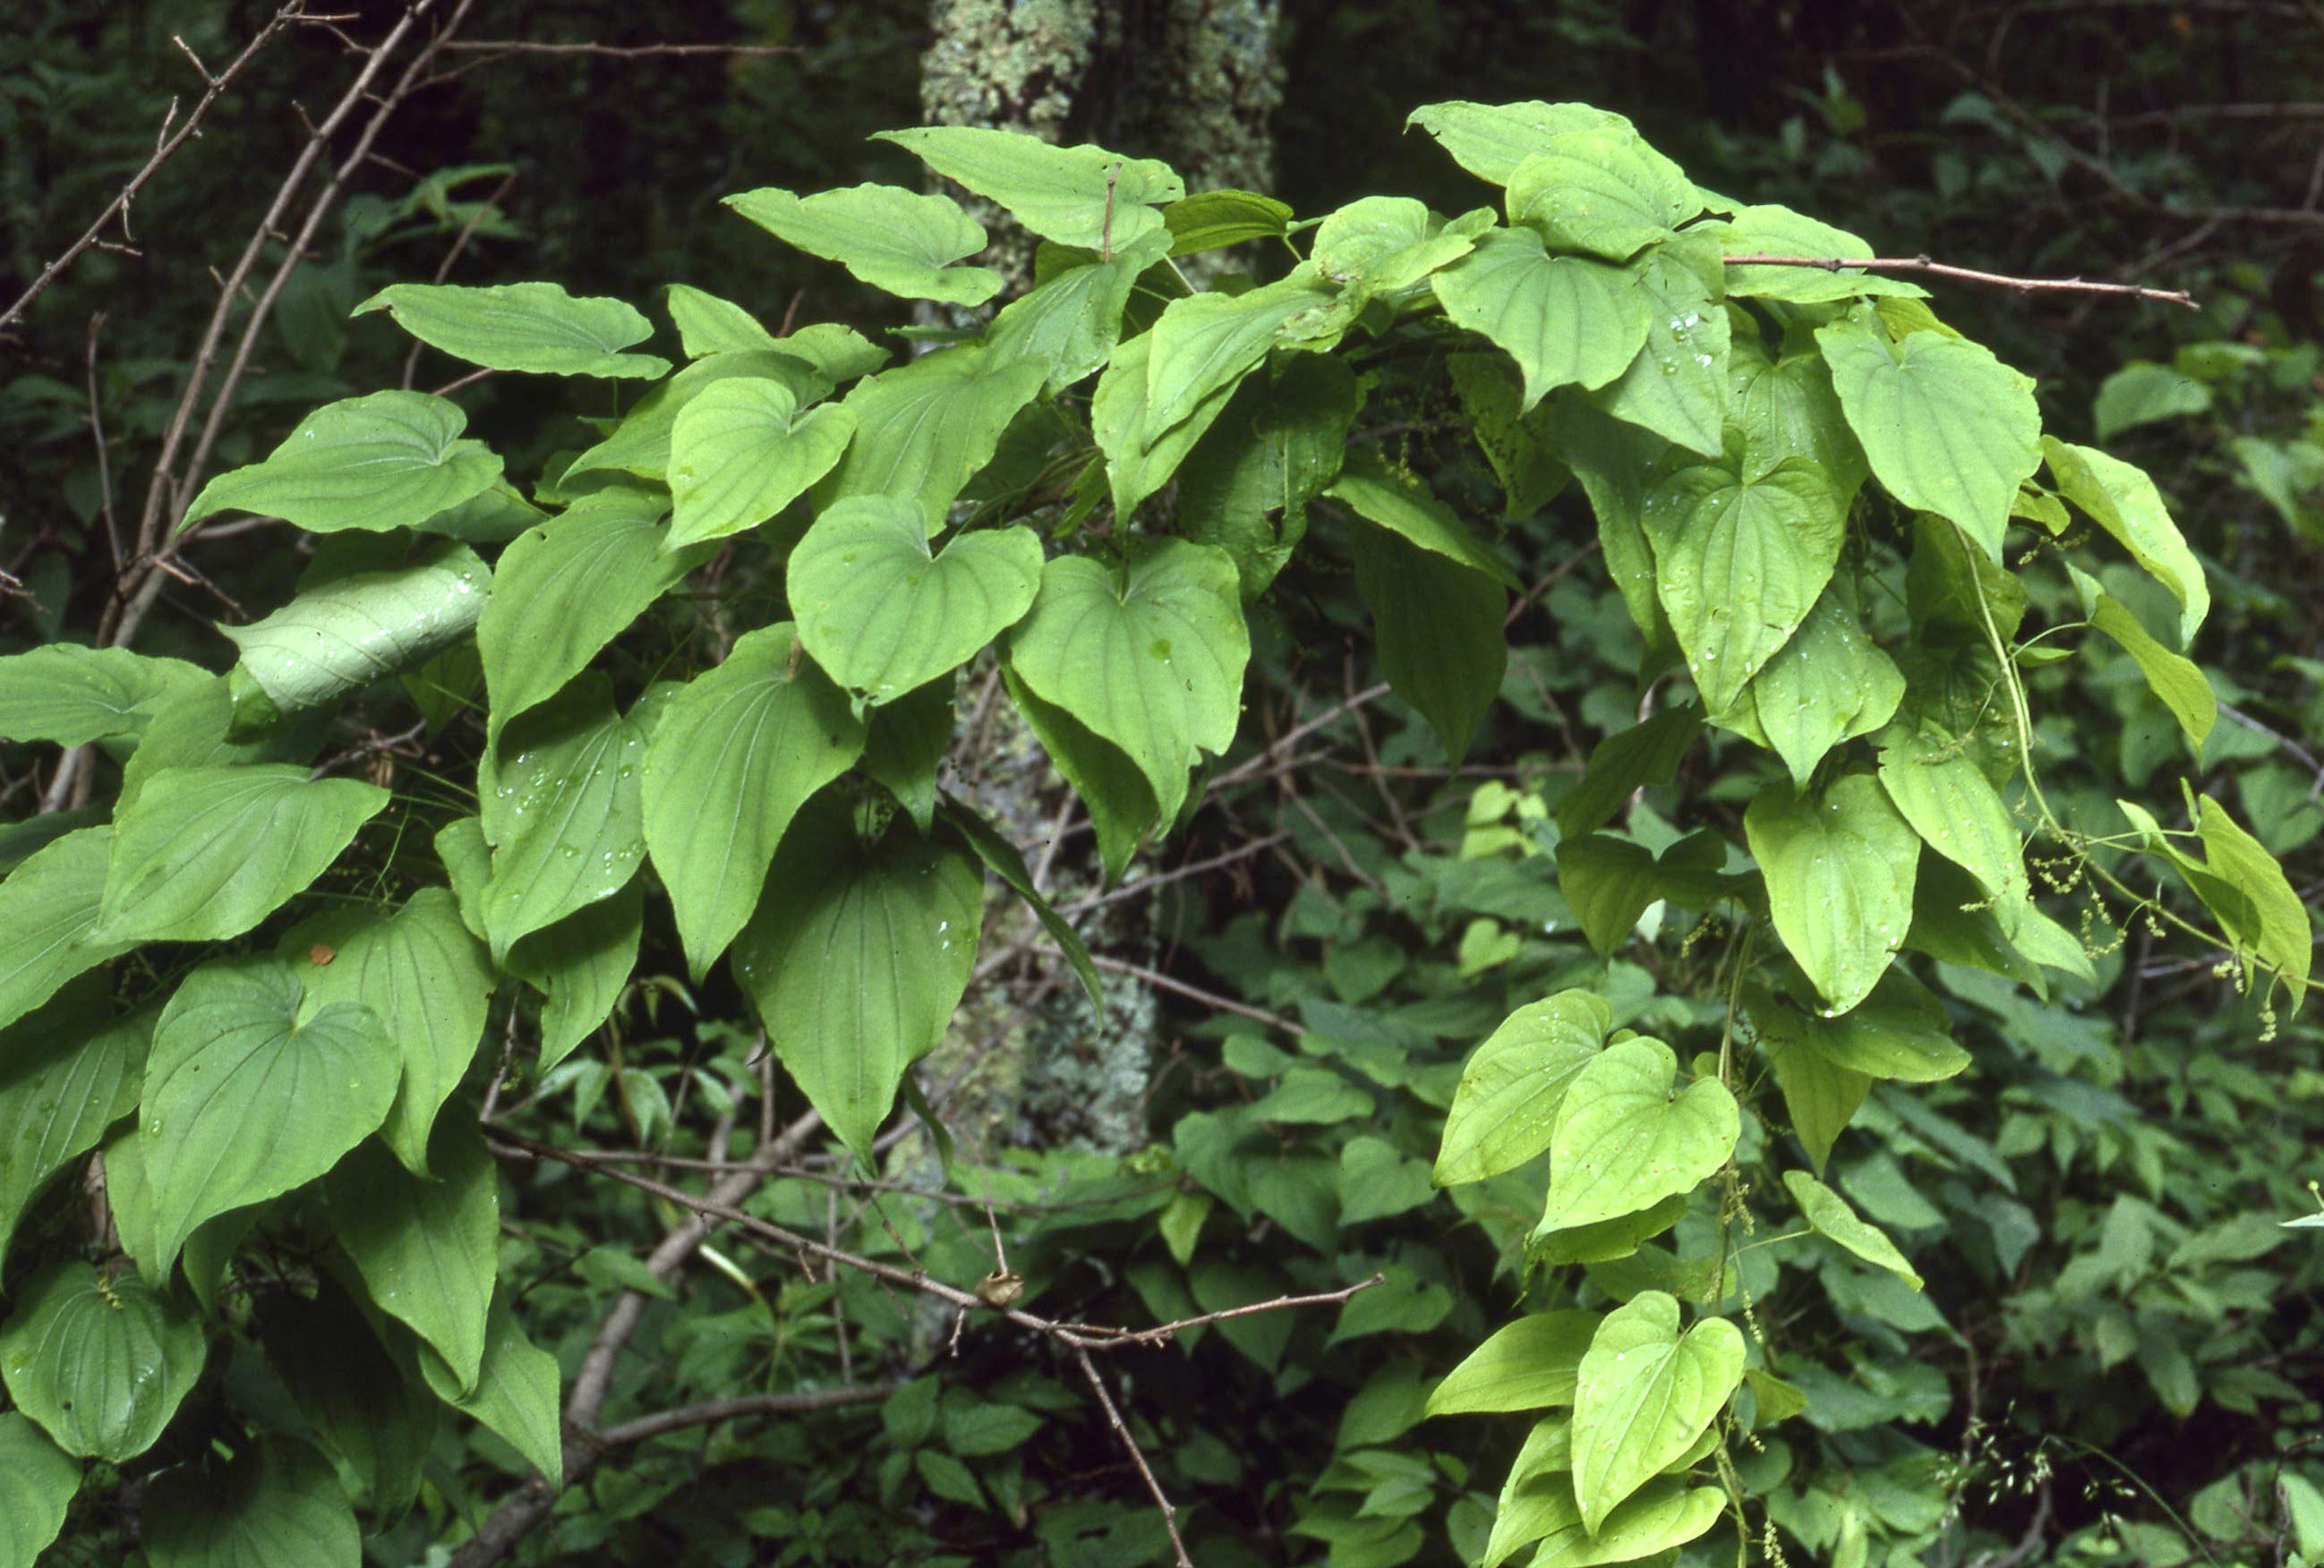 The Scientific Name is Dioscorea villosa. You will likely hear them called Wild Yam. This picture shows the Heart-shaped leaves with distinct venation; male and female flowers on separate plants (dioecious). of Dioscorea villosa